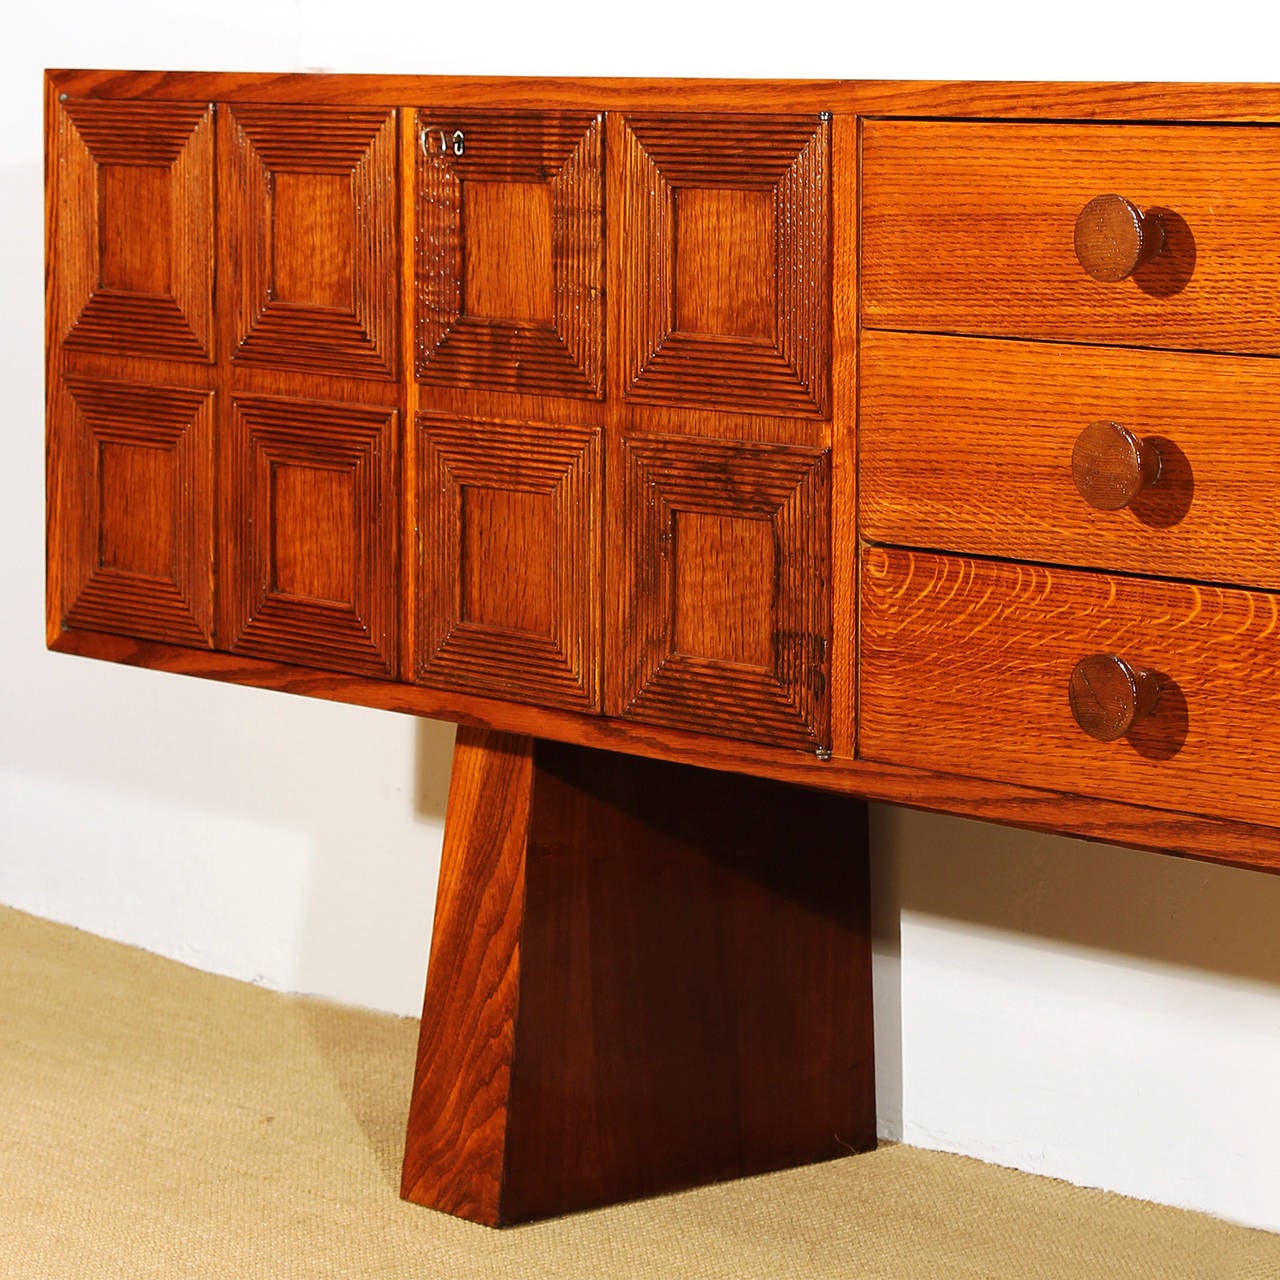 1940s Cubist Sideboard, Solid Oak and Veneer, Panels, Trapezoid Feet, Italy 1